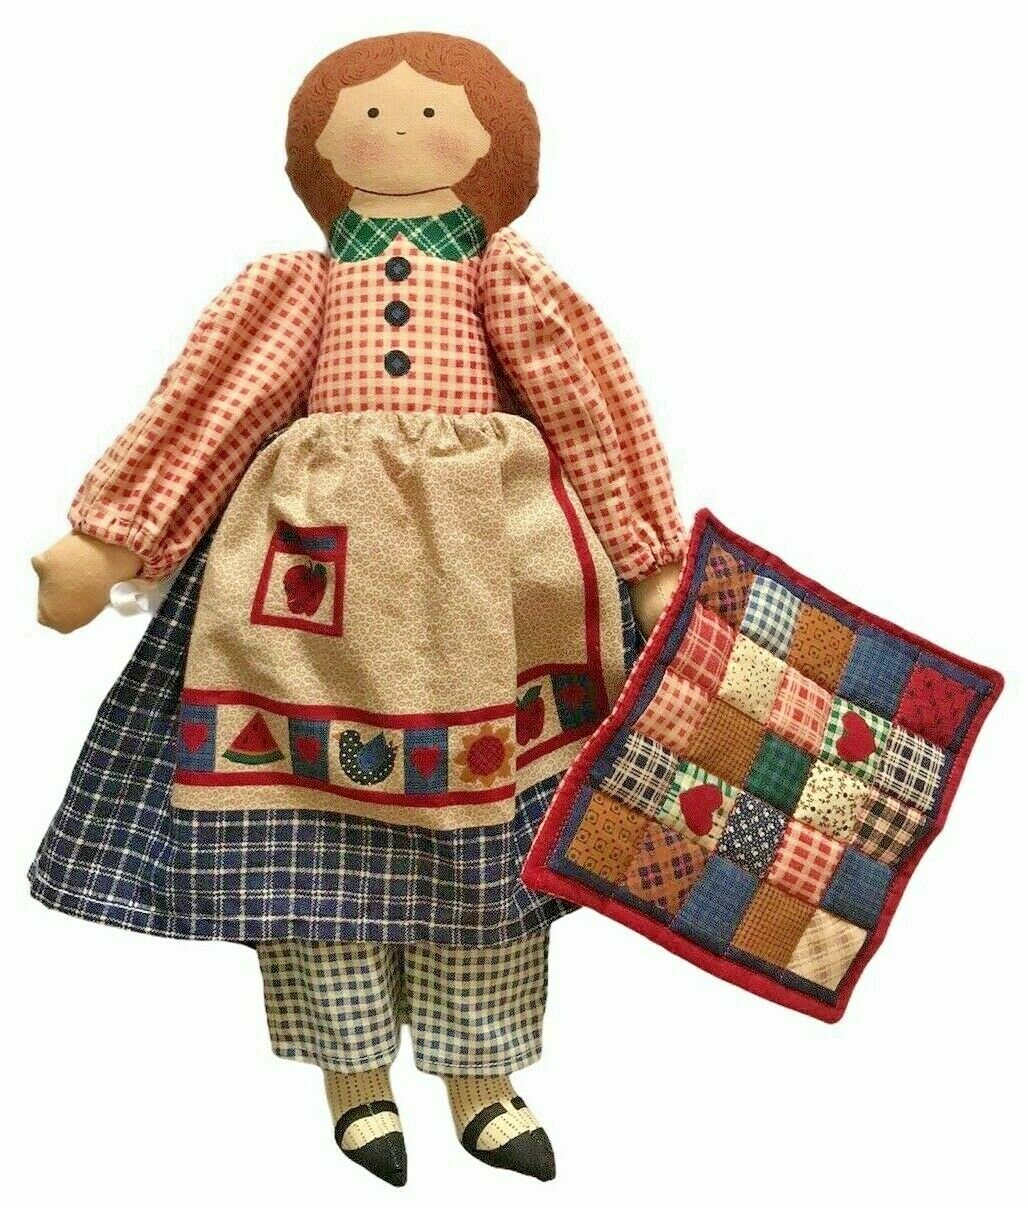 Homespun Hannah Doll Completed Homemade Sewing Panel Rag Doll Americana Quilt